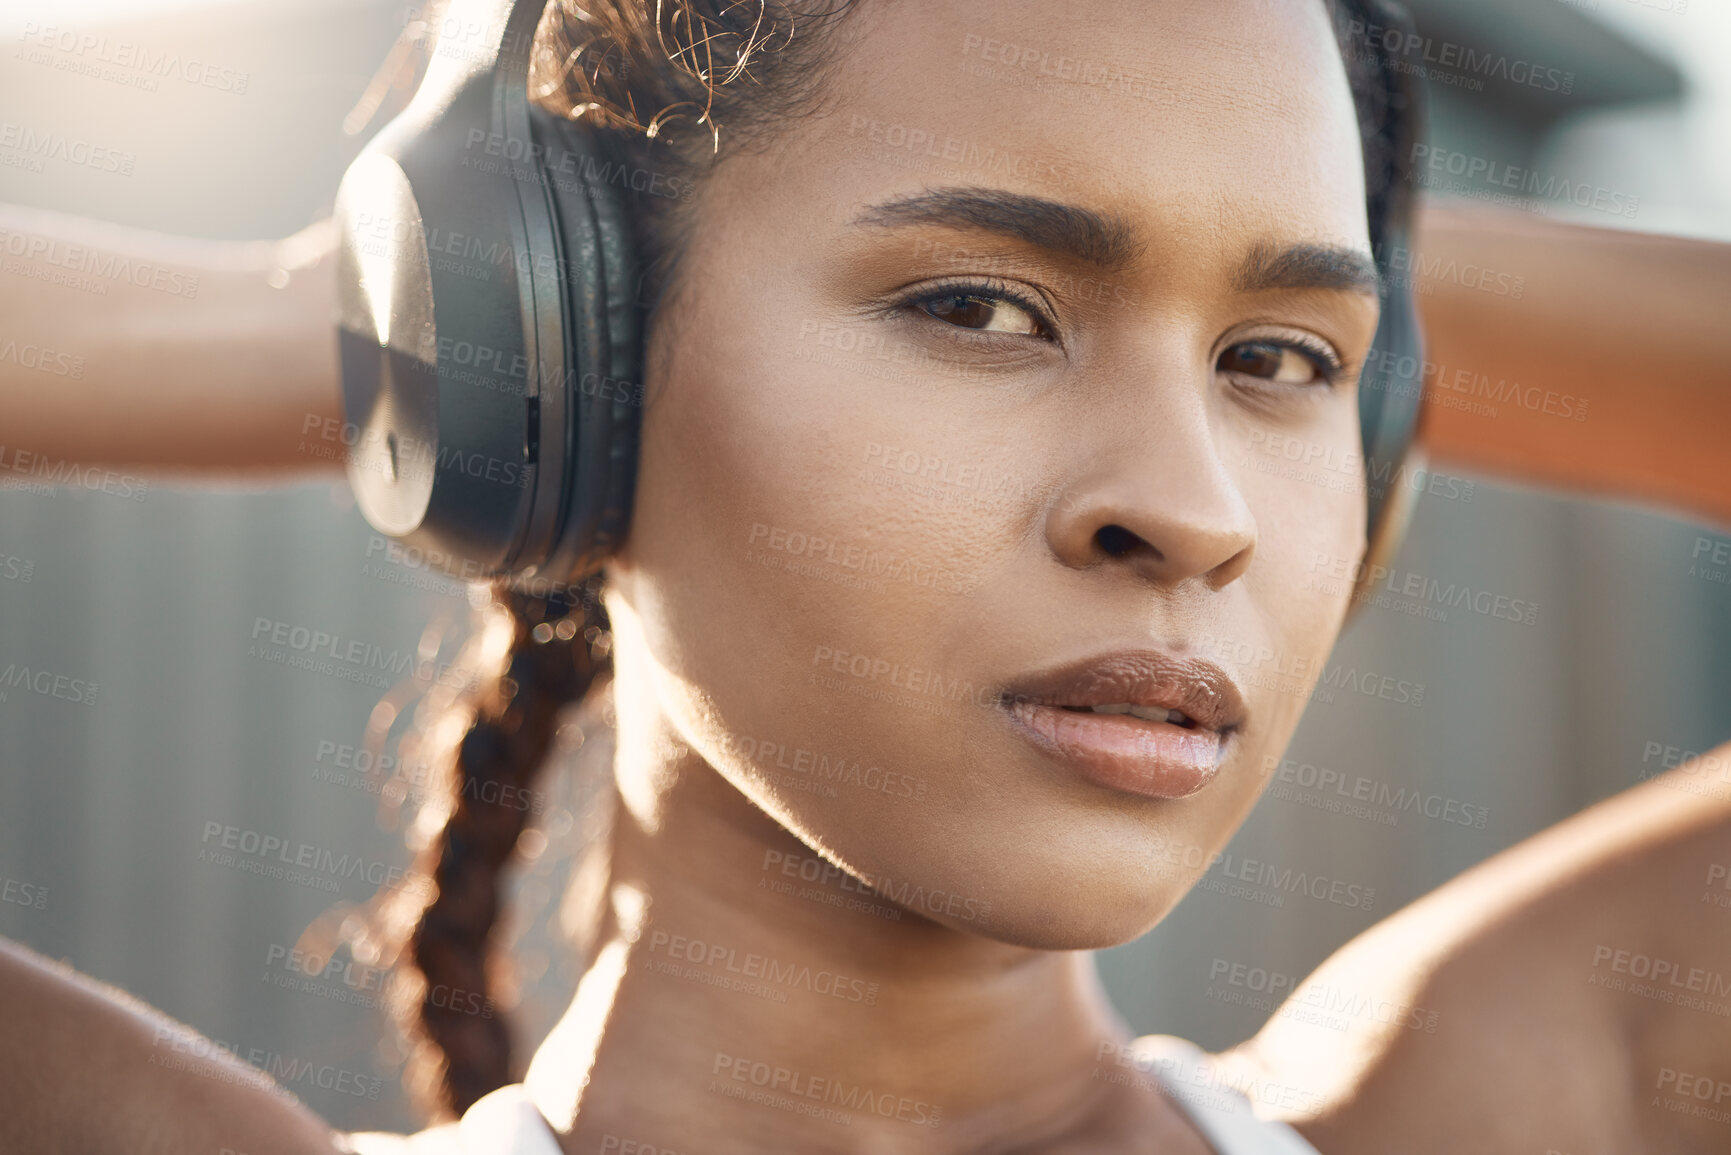 Buy stock photo Headphones, woman portrait or face of runner streaming music to start training, workout or exercise in city. Rest, break or healthy sports girl athlete listening to radio or fitness podcast to relax